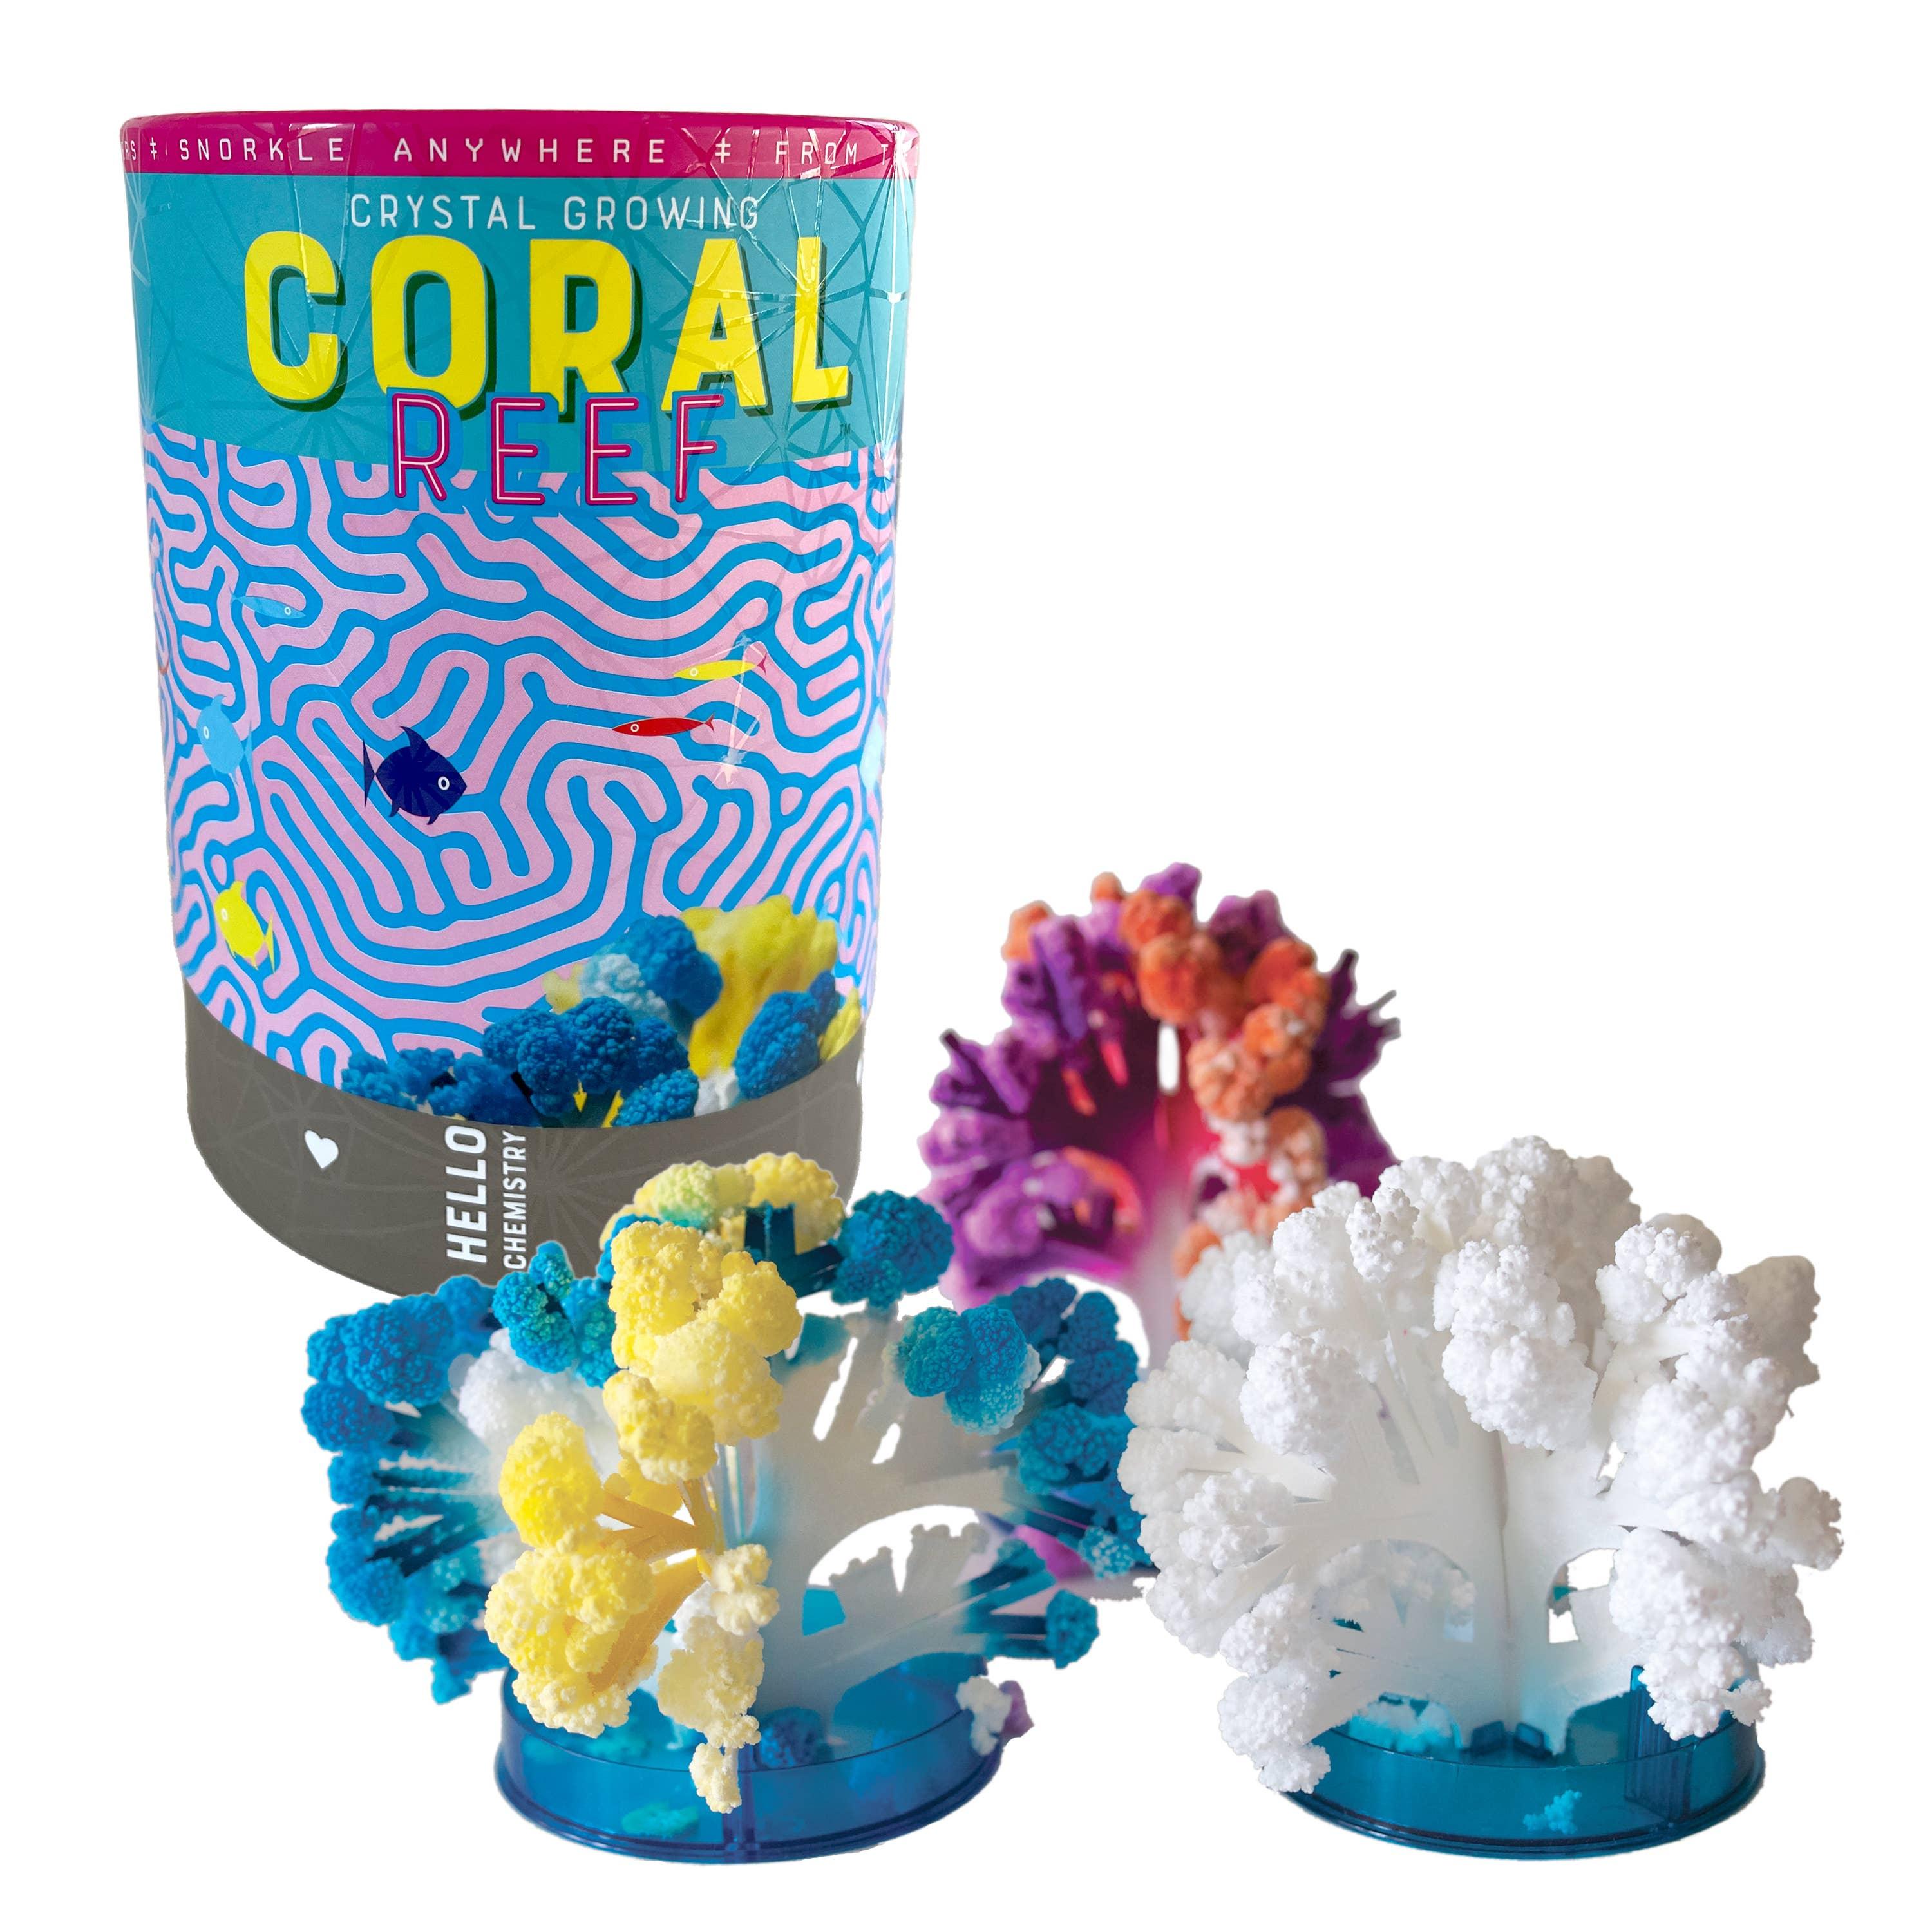 Crystal Growing Coral Reef - Why and Whale